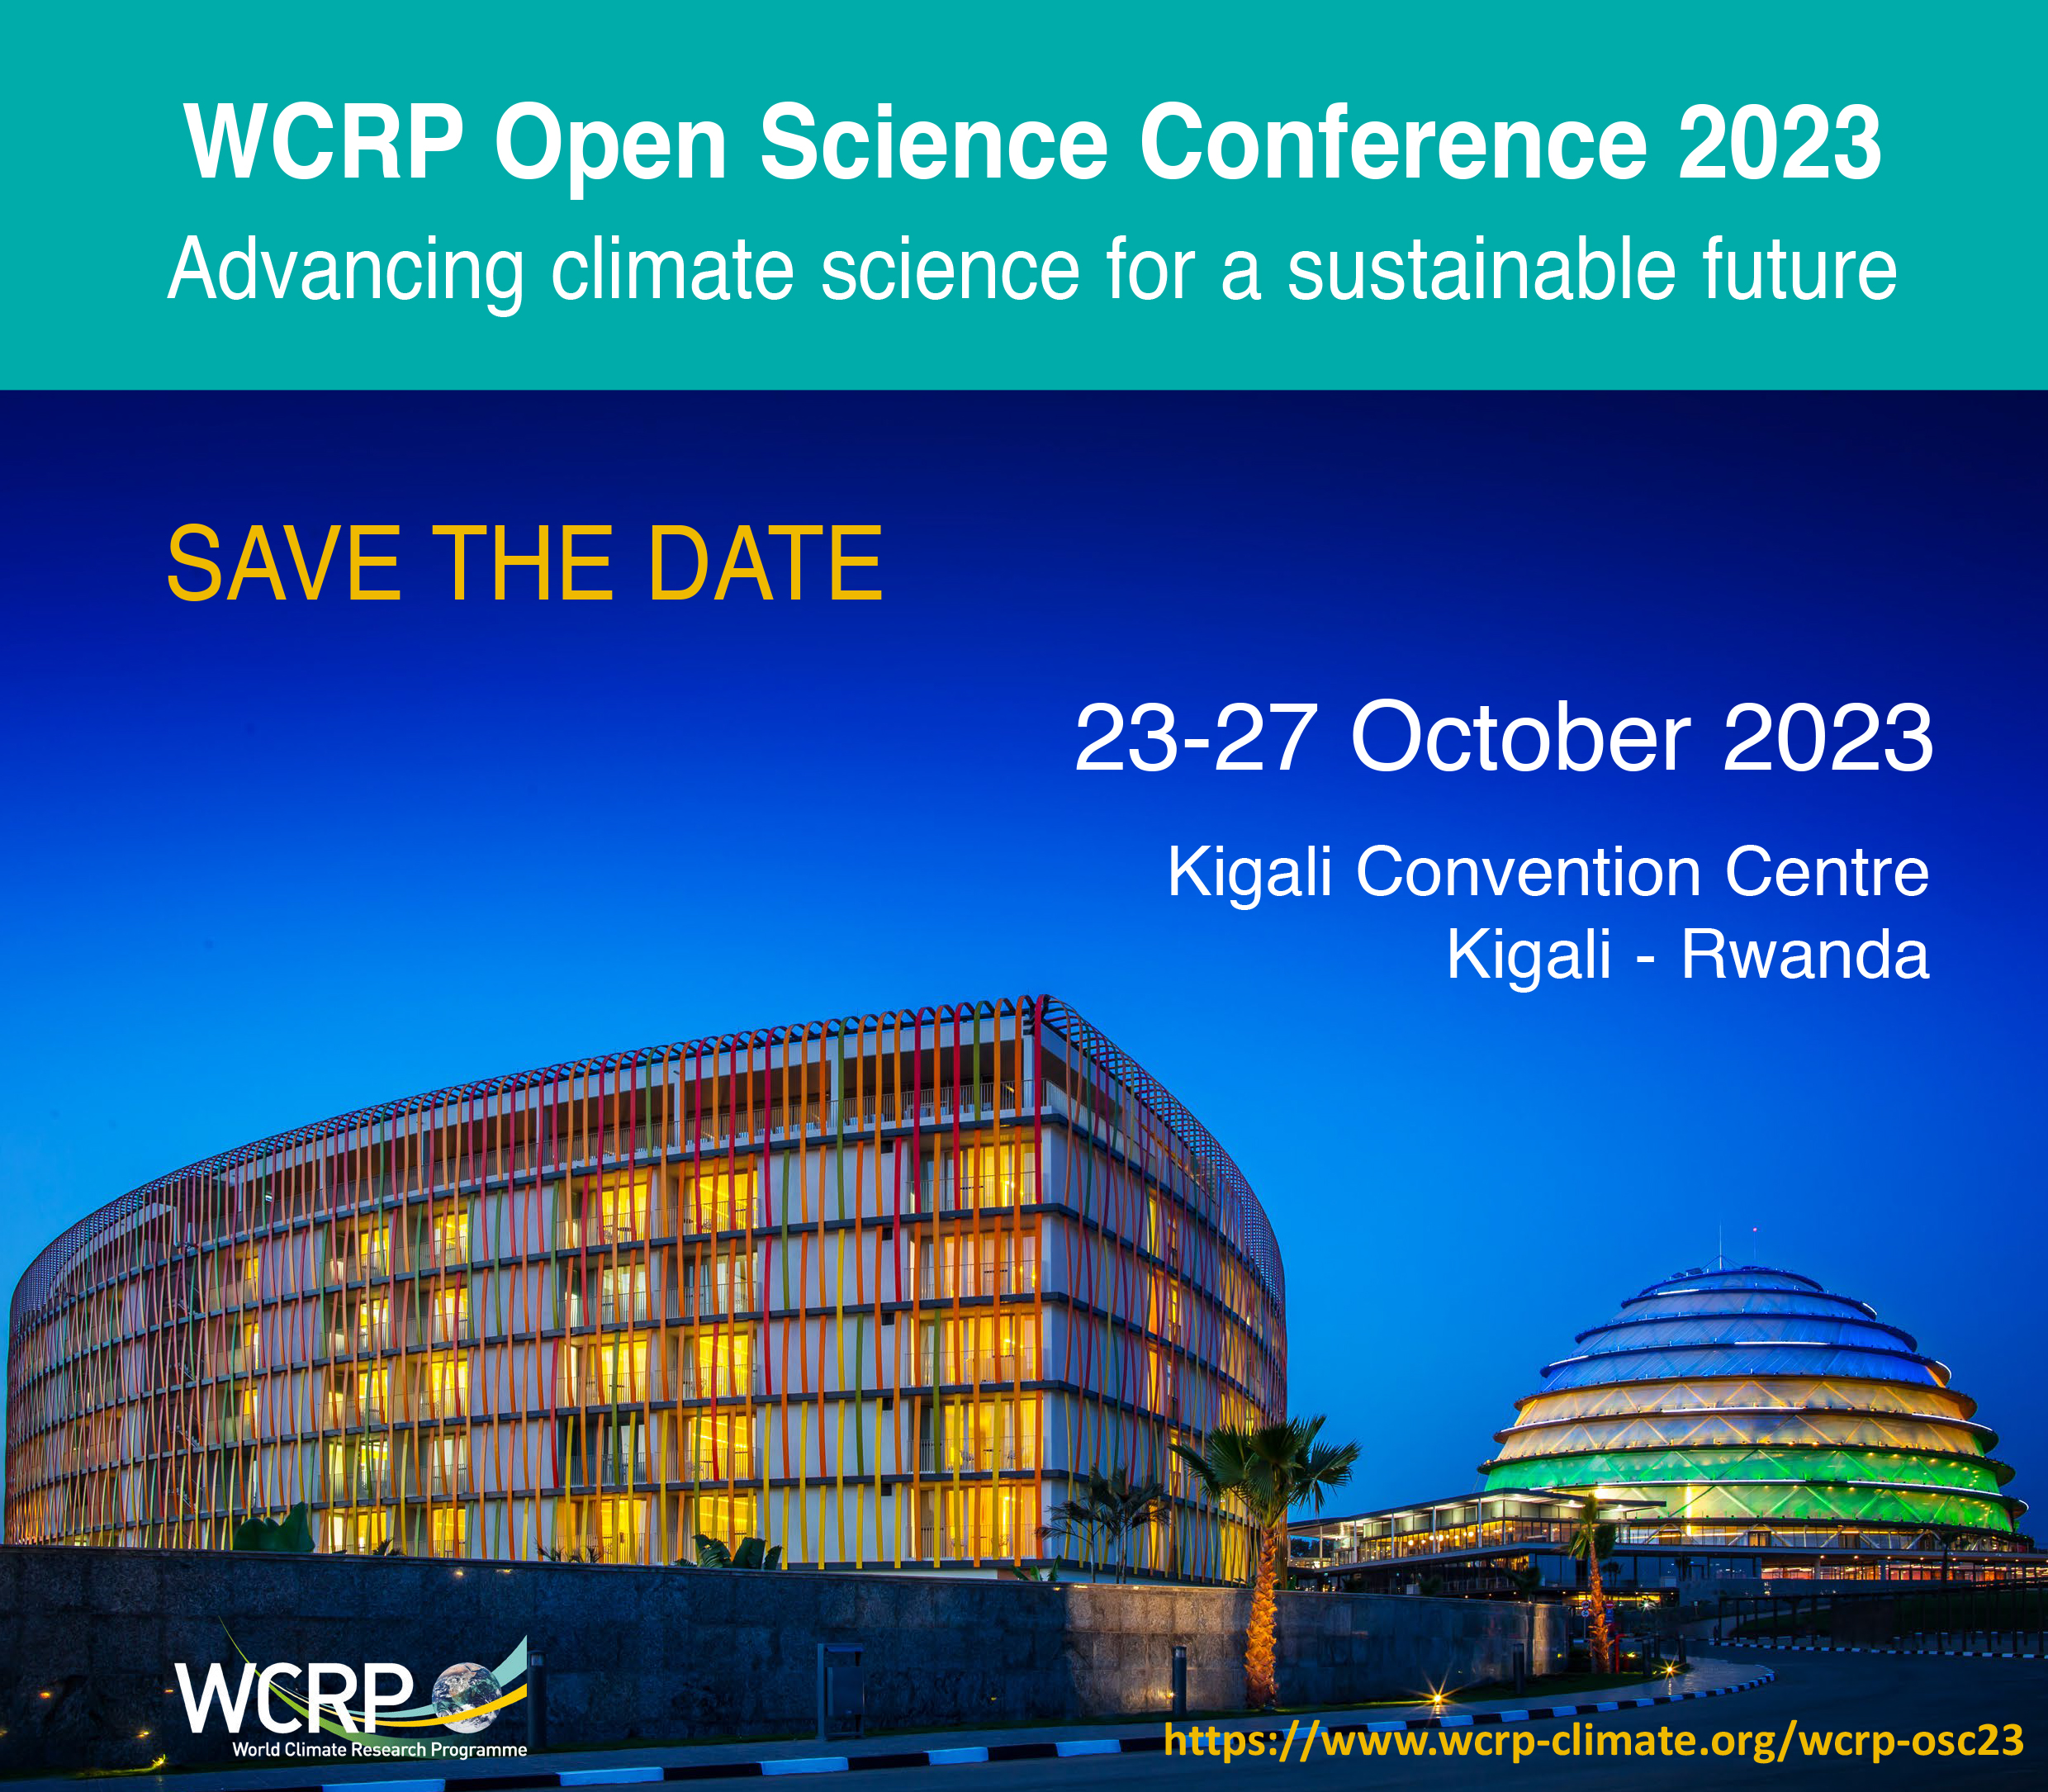 WCRP Open Science Conference 2023